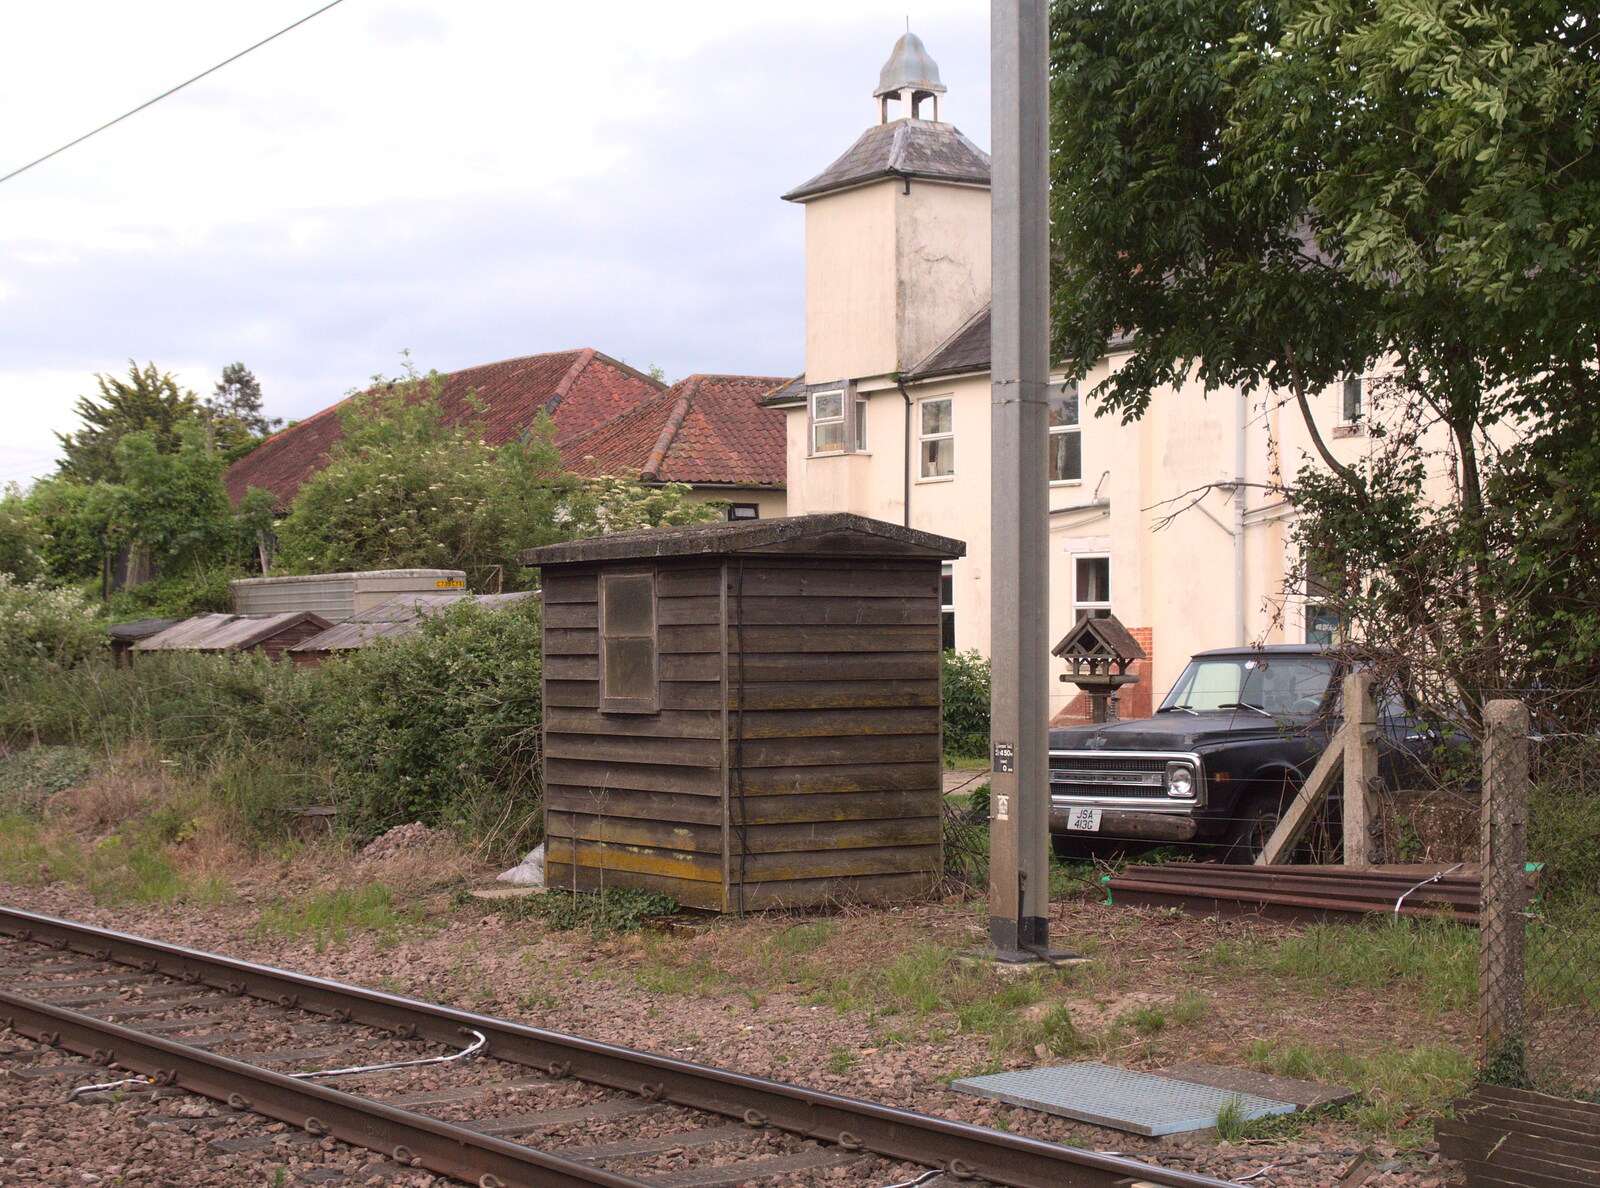 A Mellis shed by the railway line from The BSCC at the Mellis Railway and The Swan, Brome, Suffolk - 8th June 2017